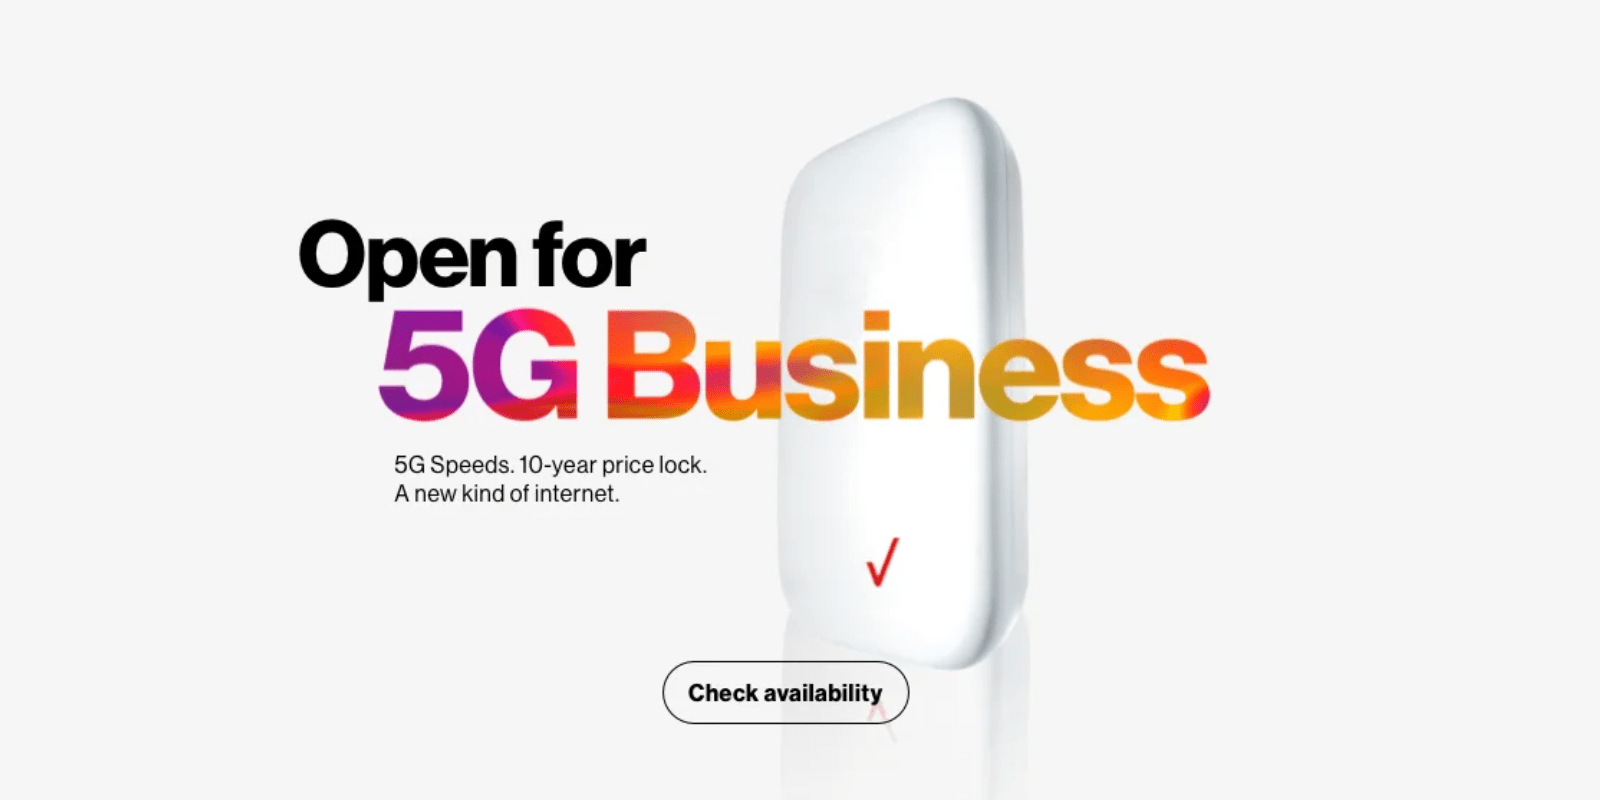 Verizon expands 5G Business now available in 42 cities with